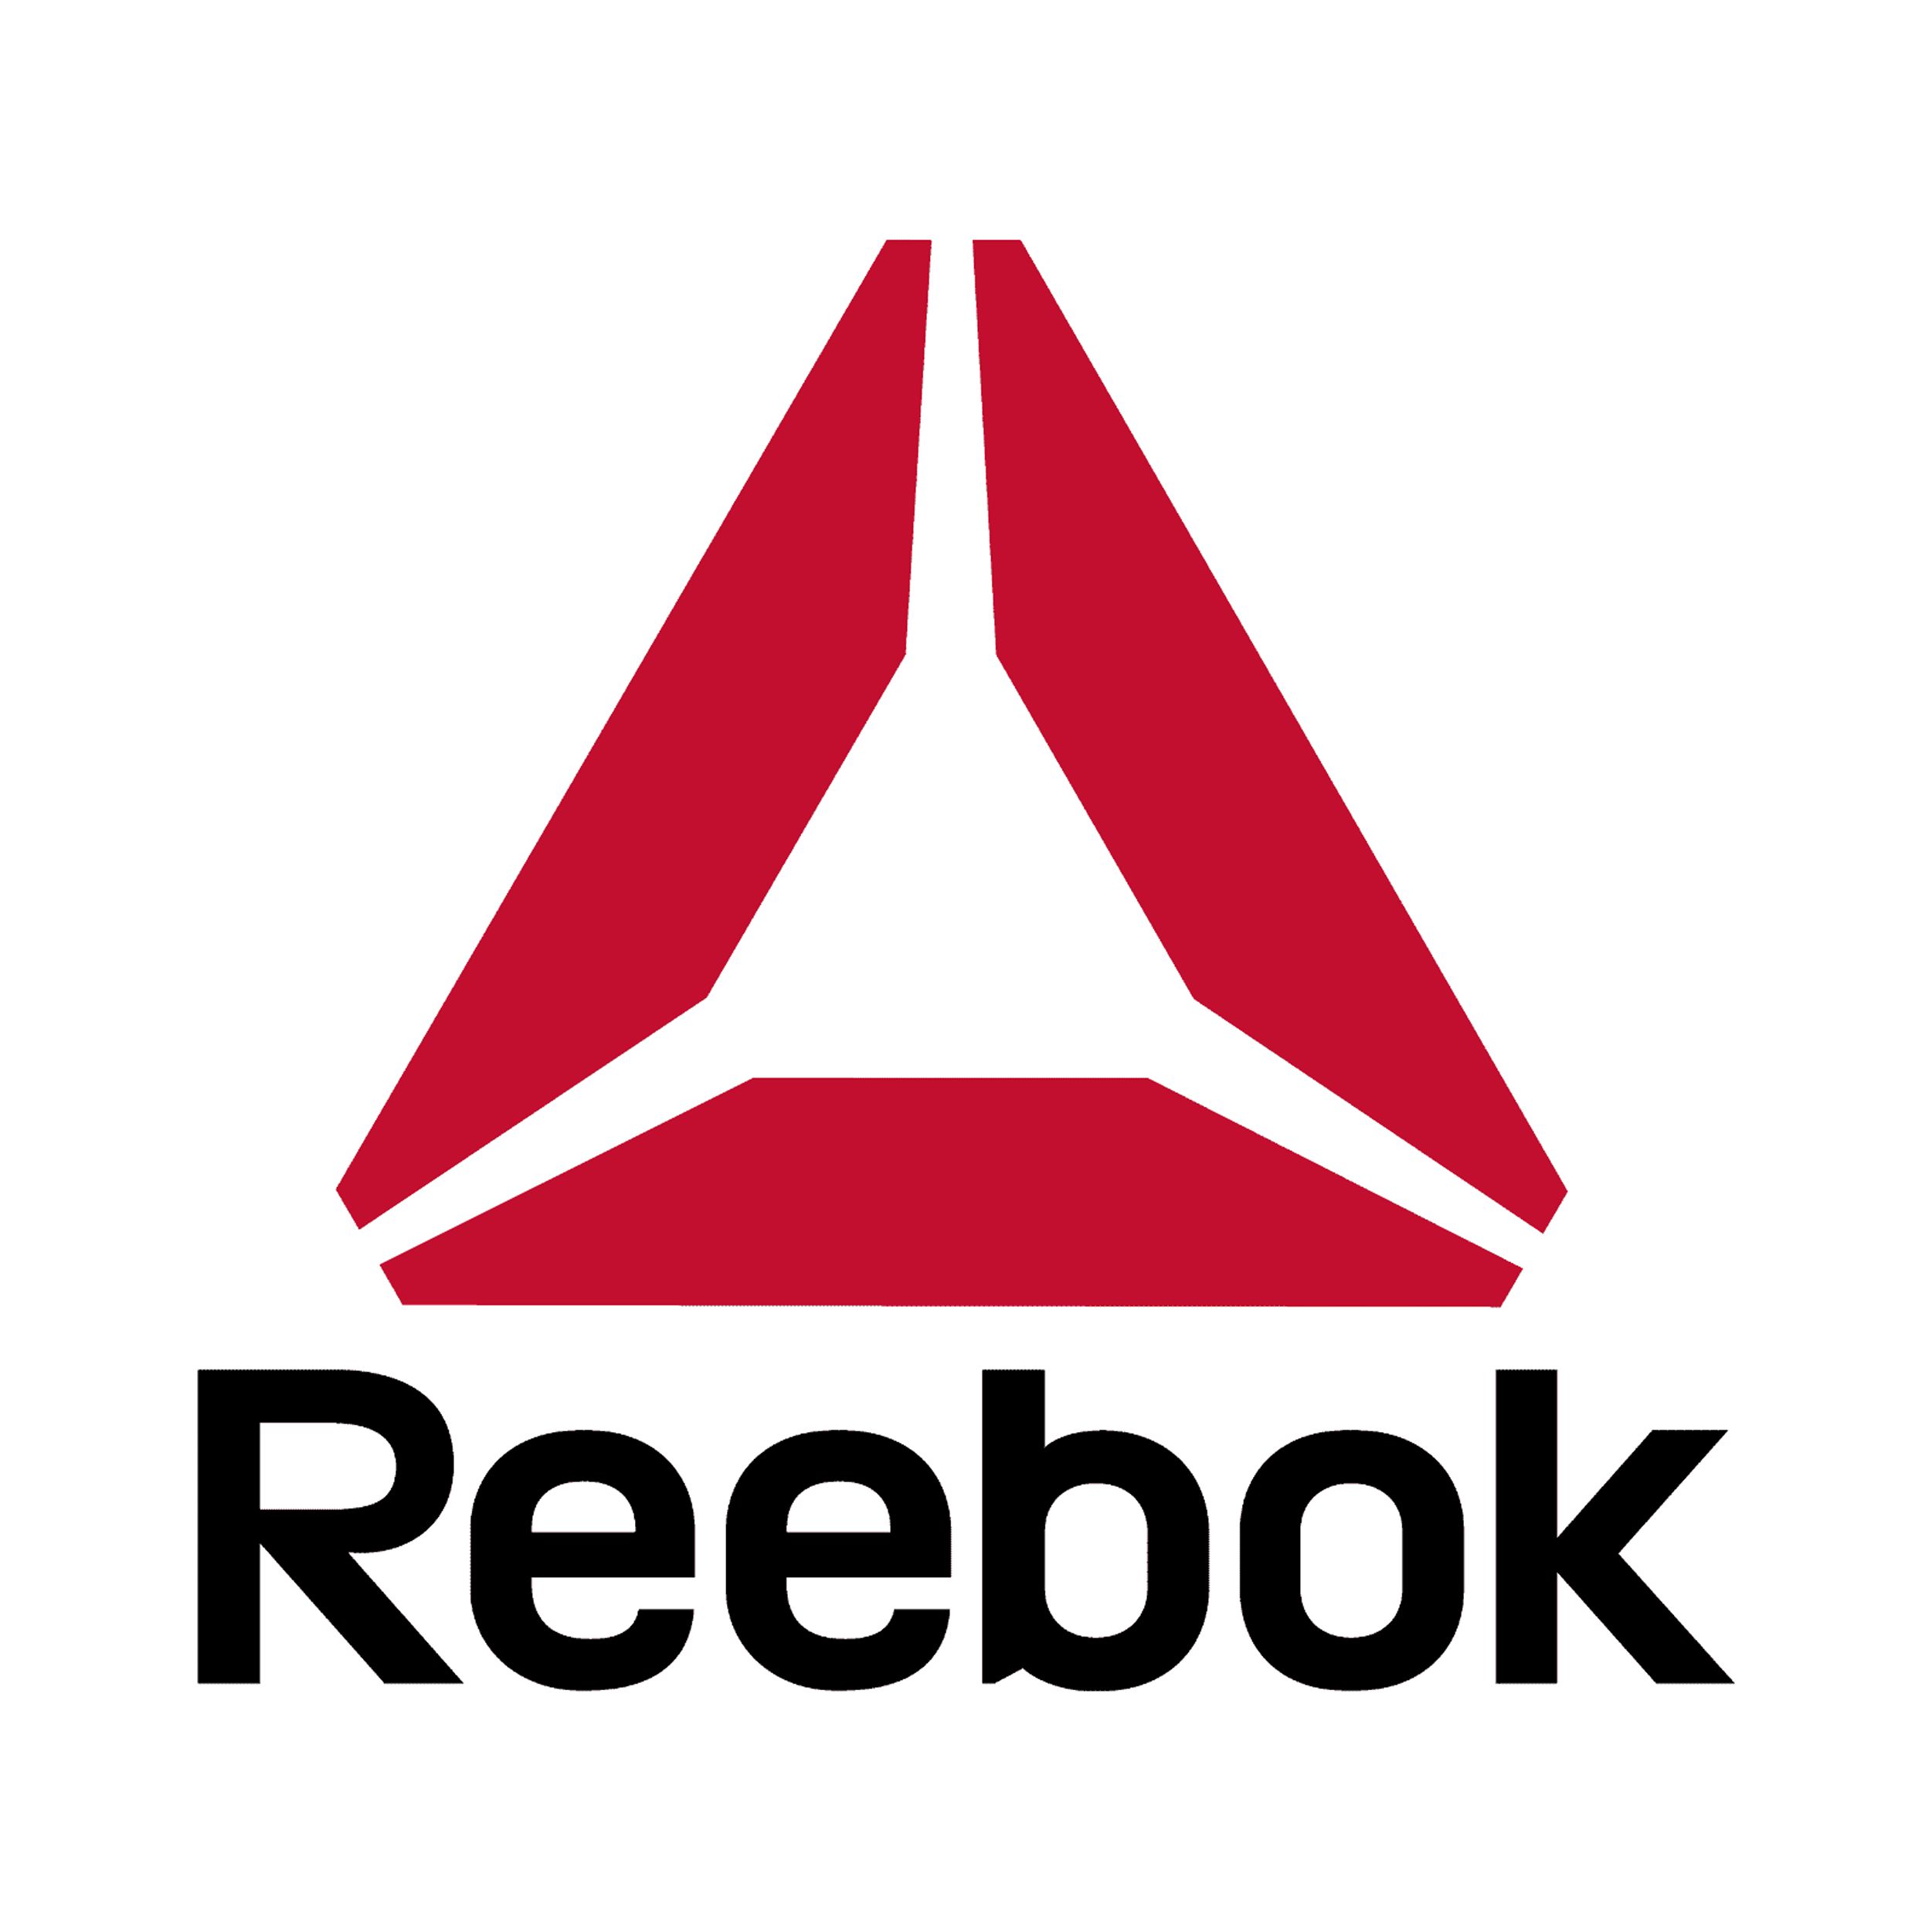 Reebok Boys' Performance Boxer Briefs, 5 Pack, Sizes S-XL - image 5 of 6